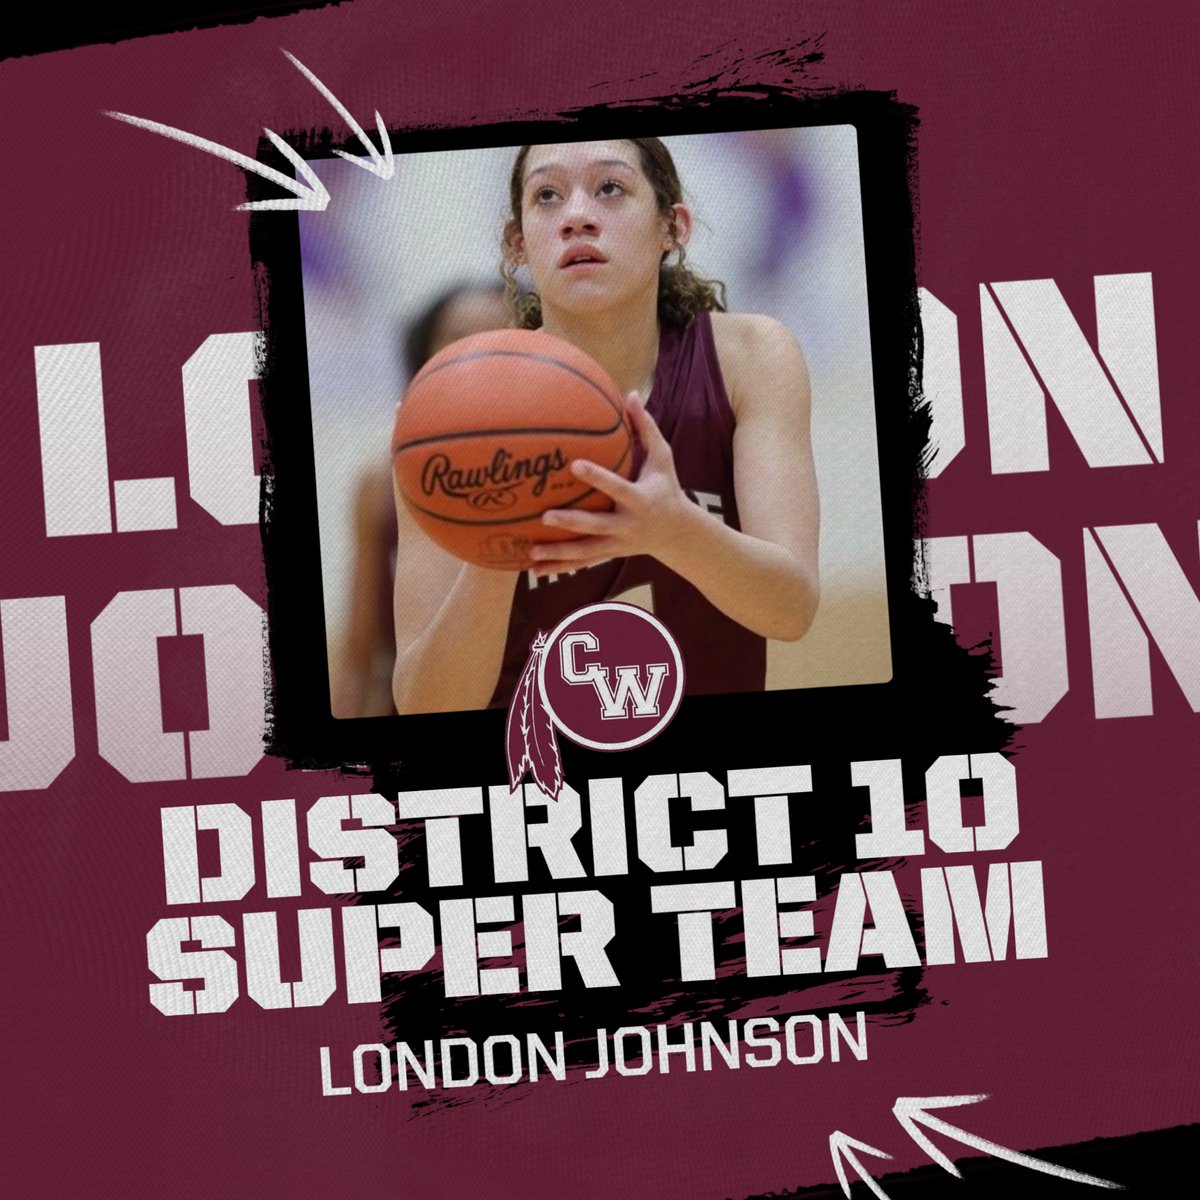 Congrats to @LondonJohnson26 for being named to District 10 Super Team